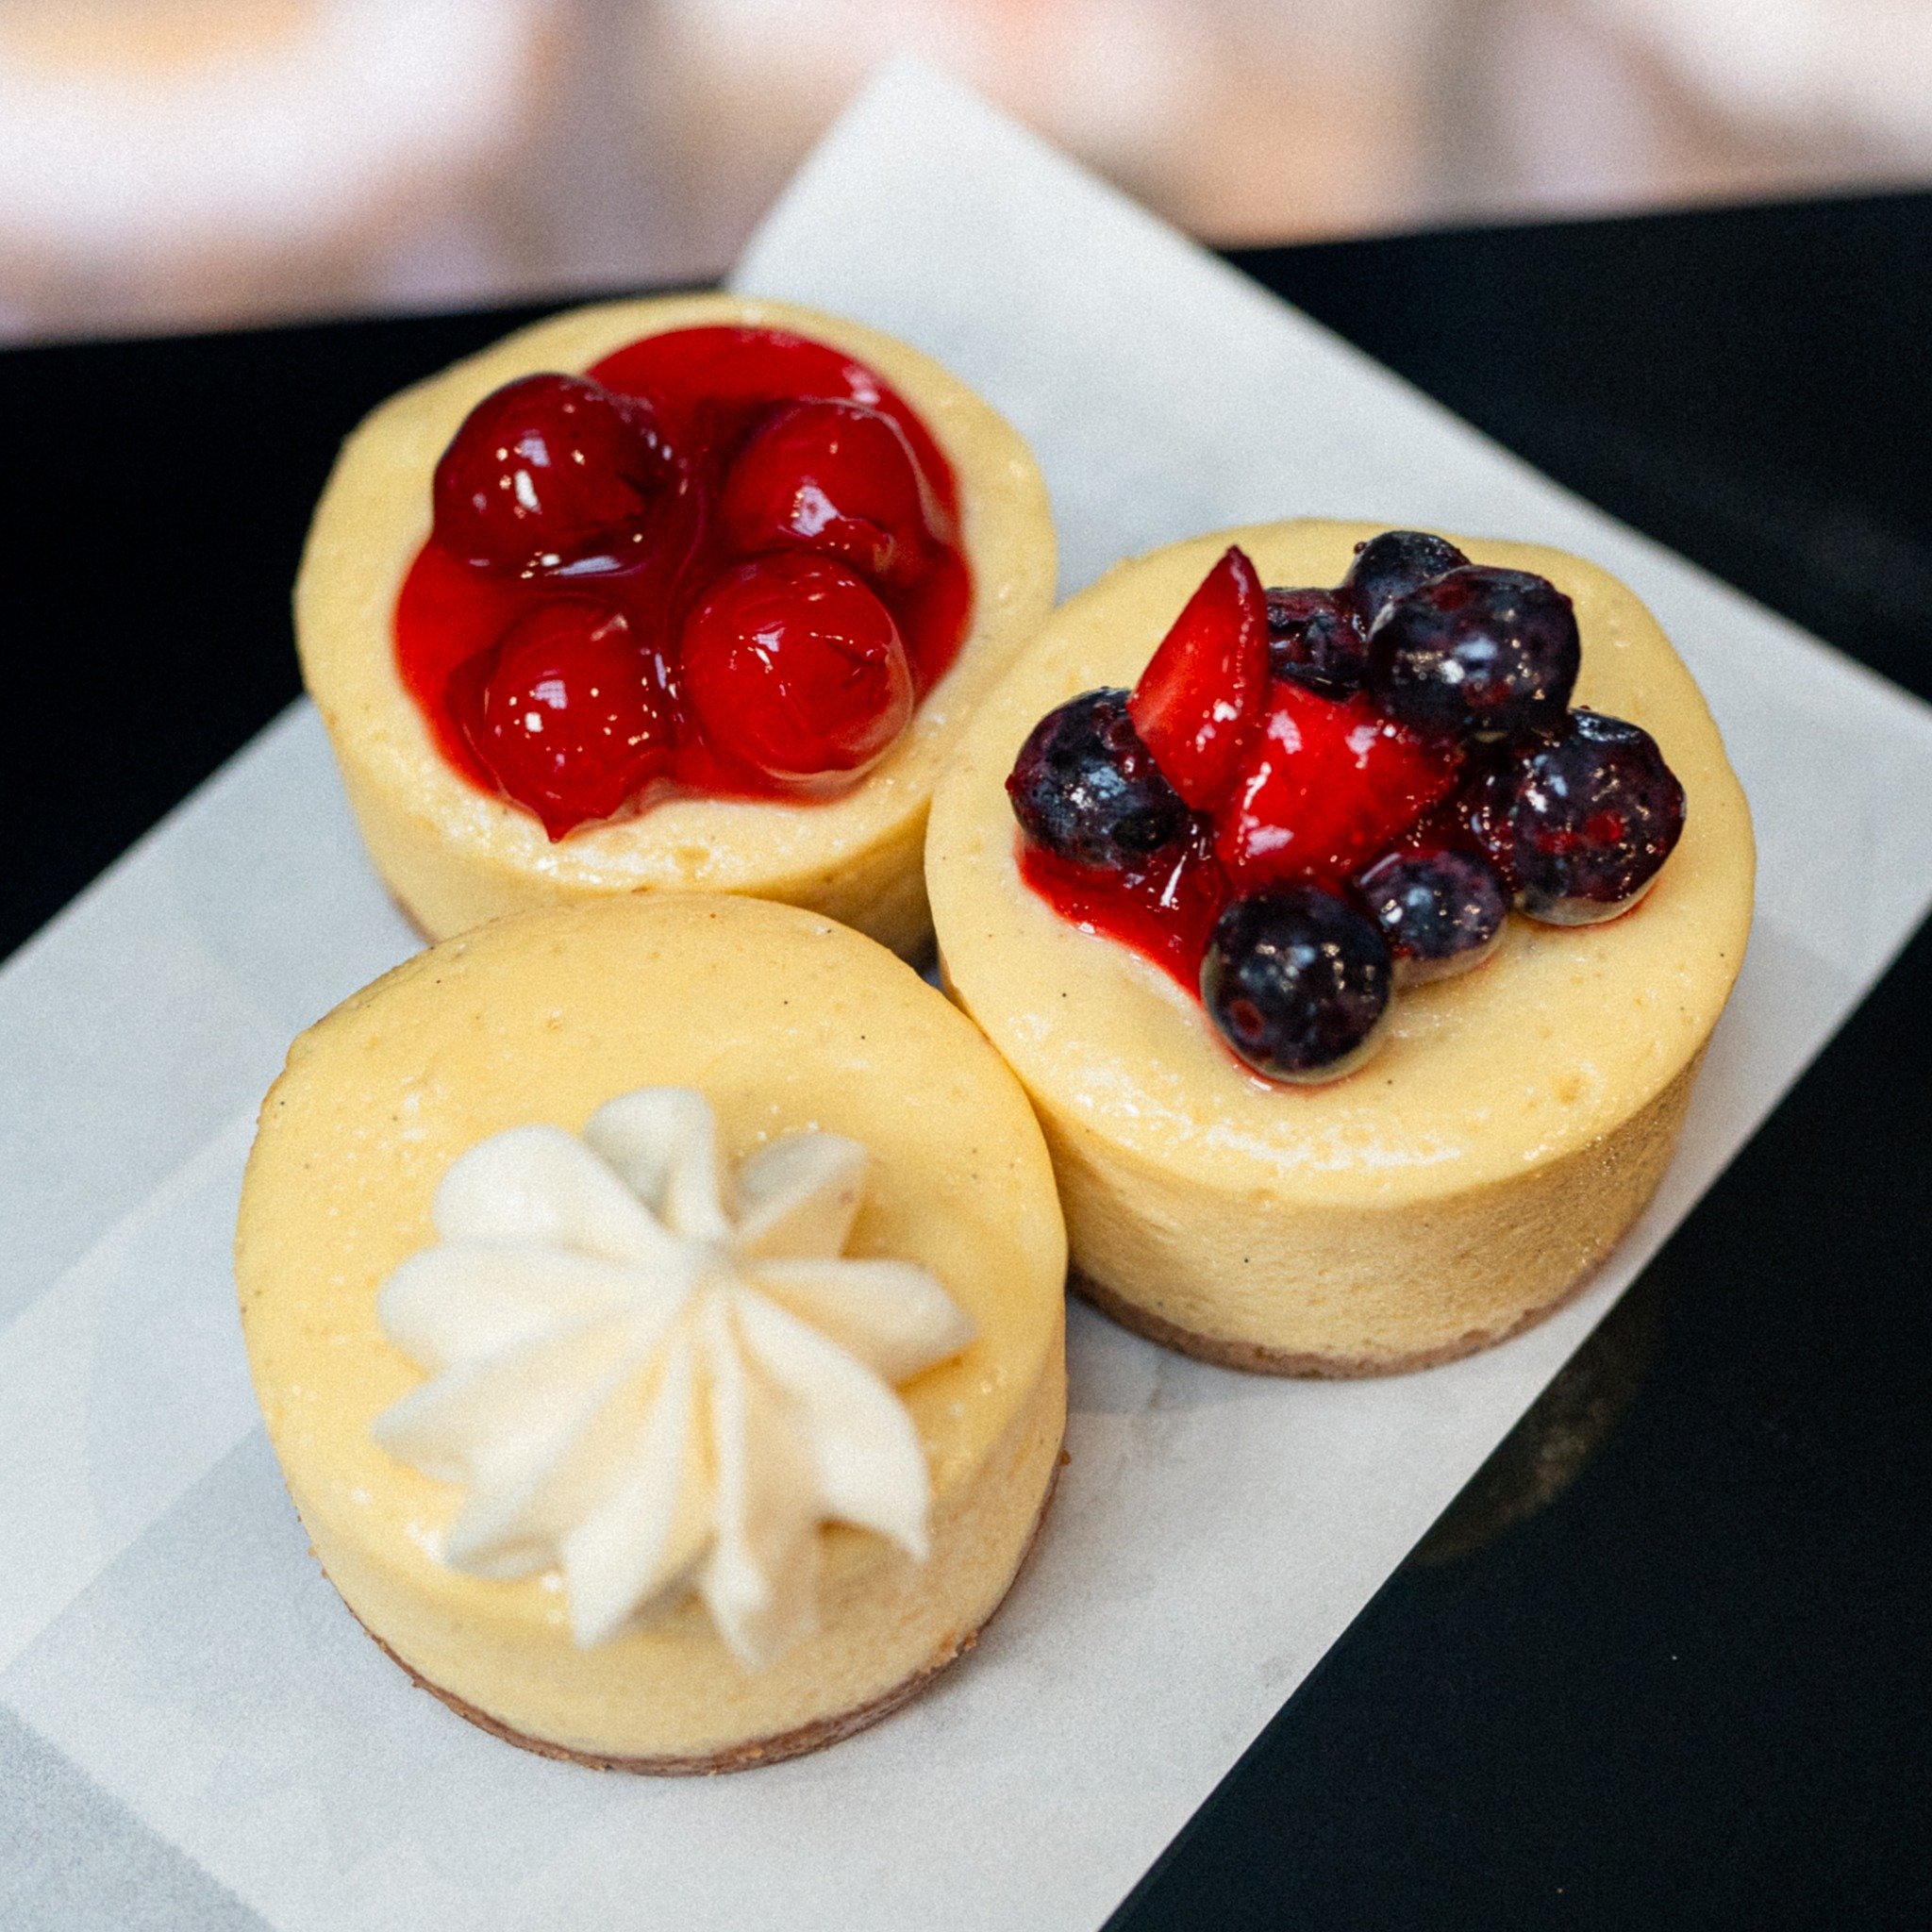 Alright Original cheesecake lovers... it's decision time. What's the best topping?

Cherries, mixed berries, or our famous Cheesecake Buttercream?? 

Let us know in the comments 🗣️

 #cheesecake #bakery #yum #dessert #cheesecakelovers #local #columb